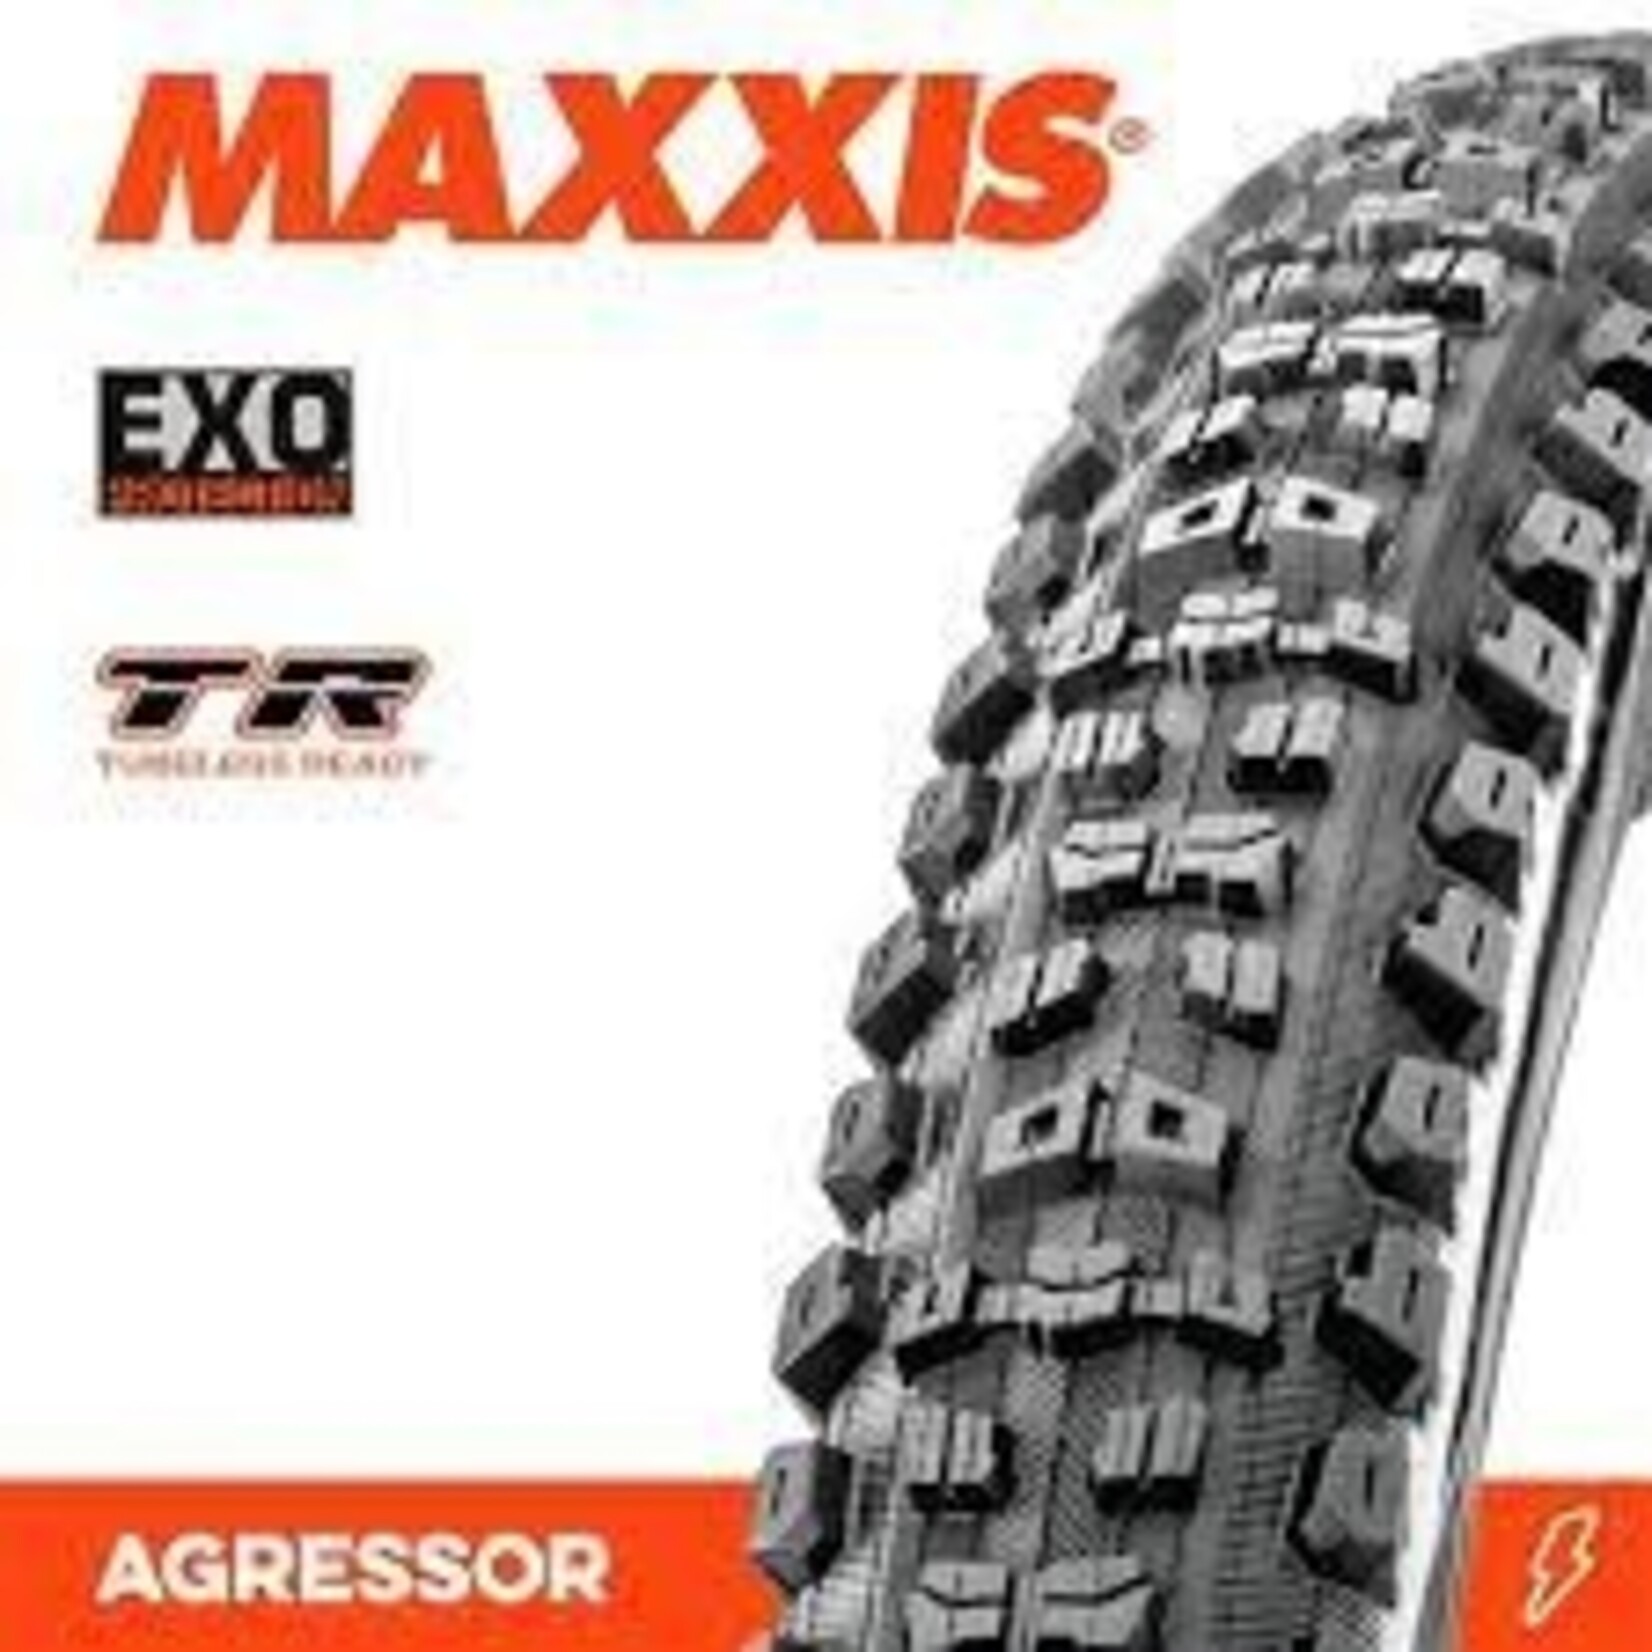 Maxxis MAXXIS MTB EXO T/R Tyres